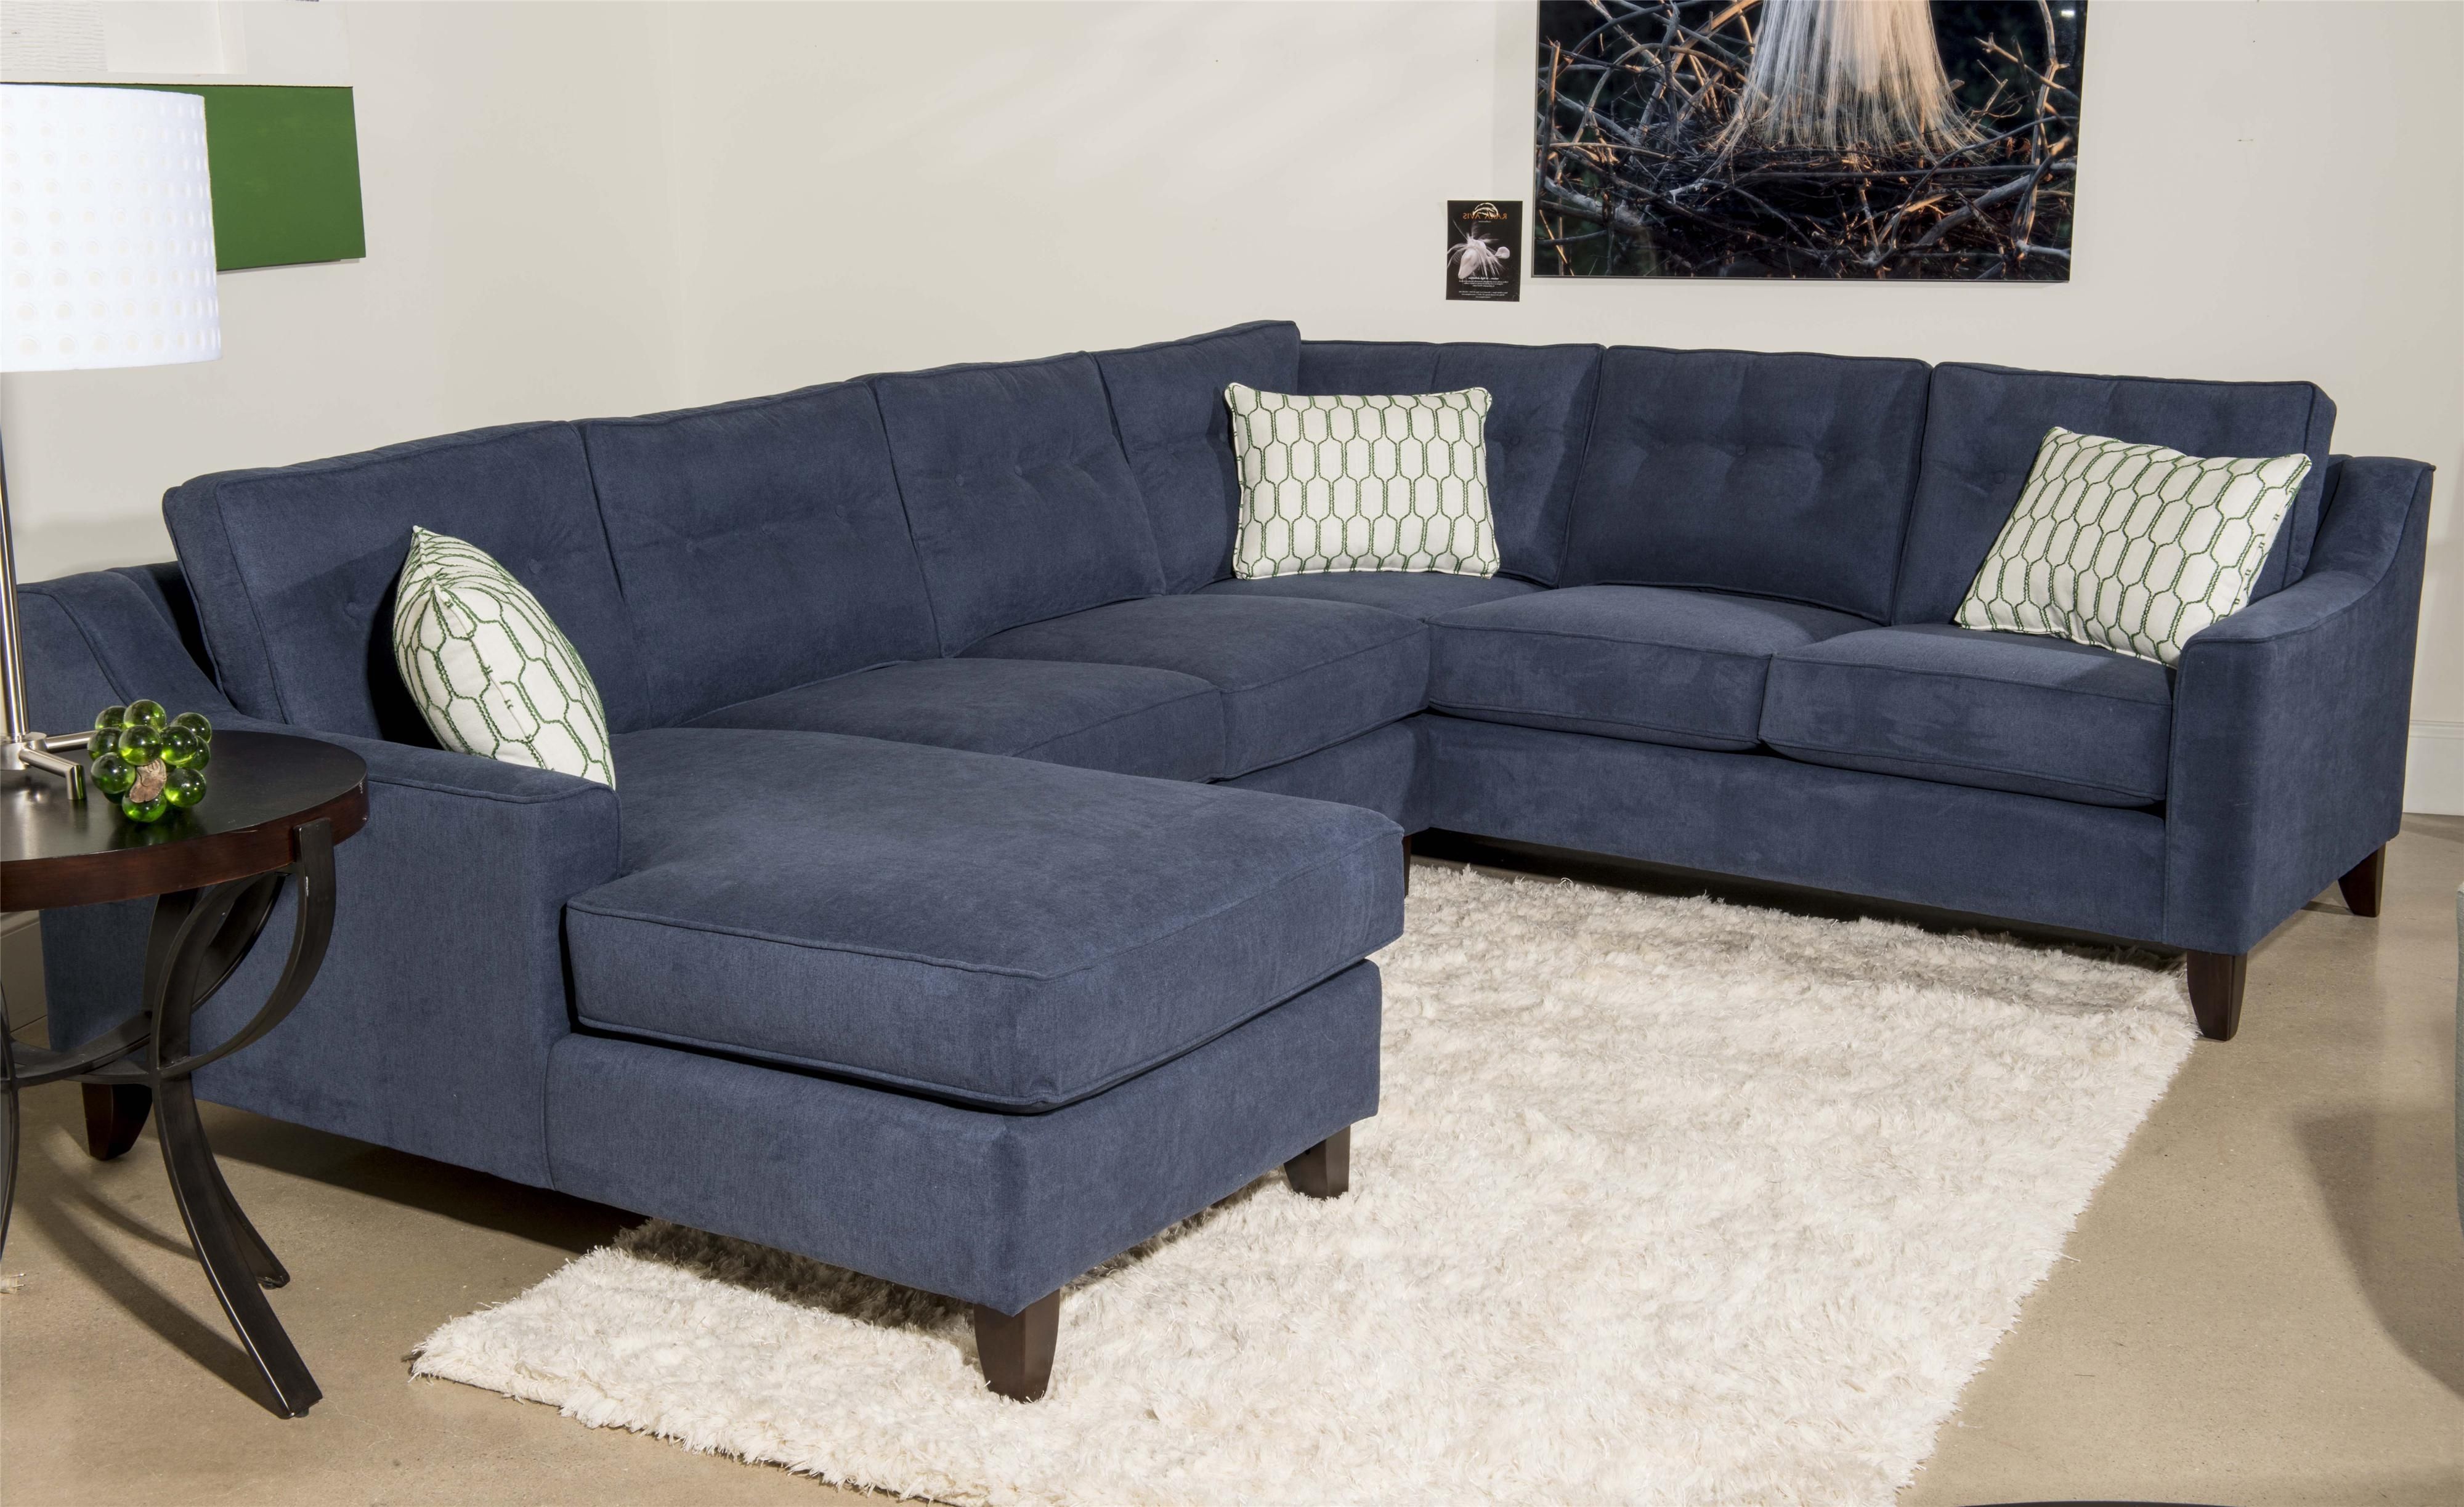 Sectional Sofa : Long Sofa Wrap Around Couch With Recliners Cuddle Pertaining To Blue U Shaped Sectionals (View 2 of 15)